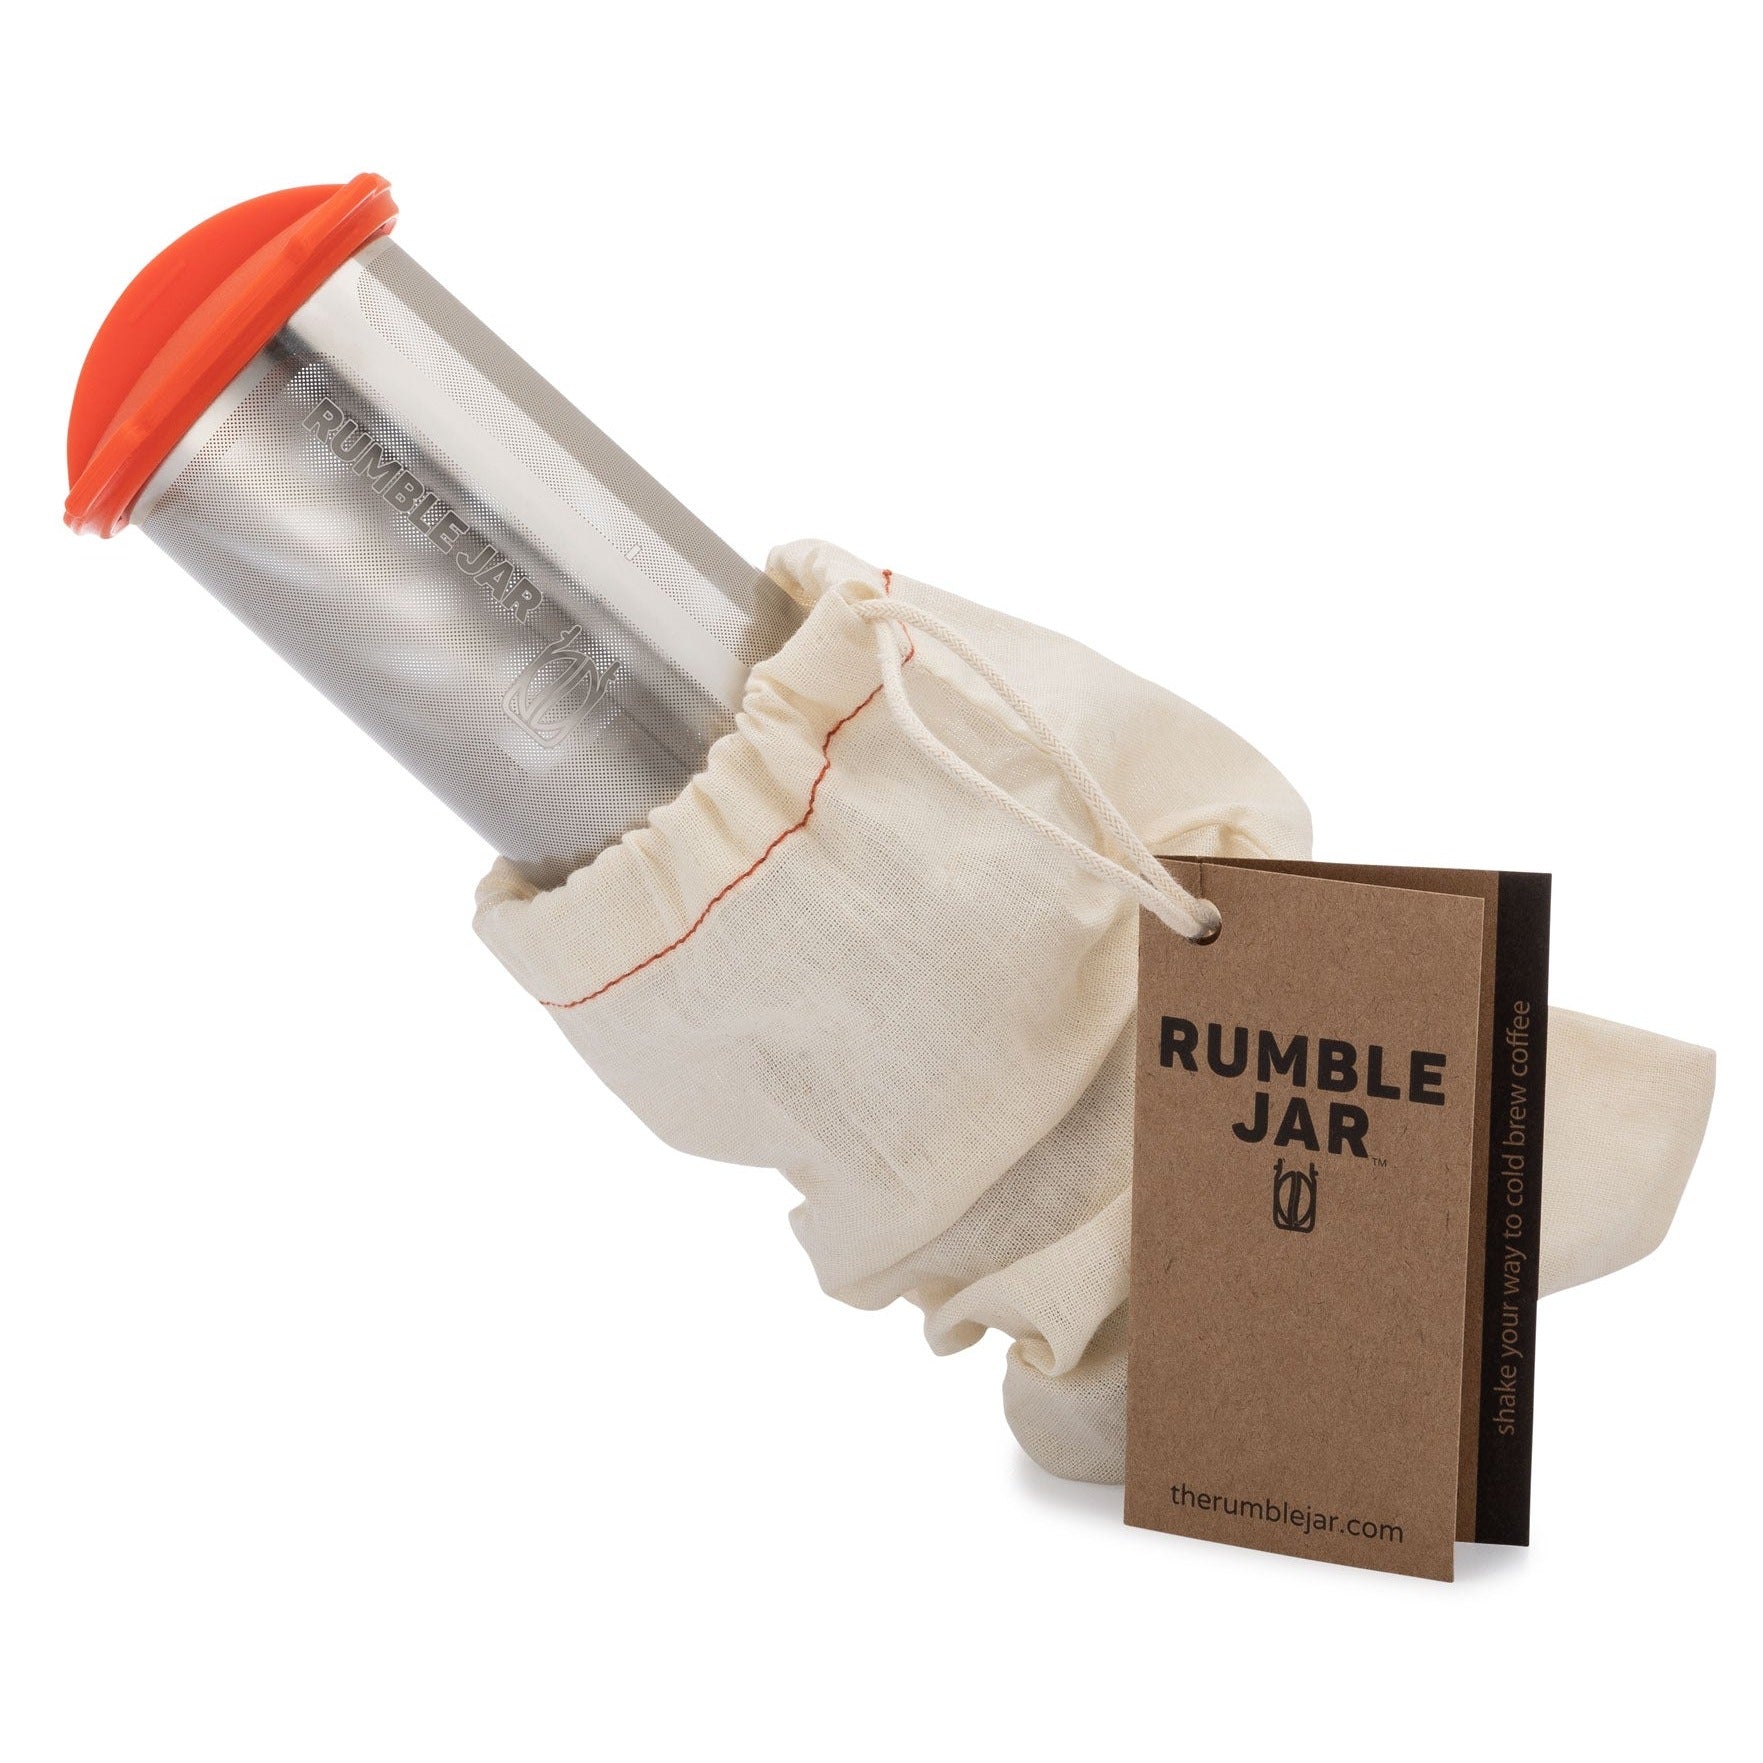 Rumble Jar cold brew coffee filter with orangey-red cap cotton filter sock and hangtag